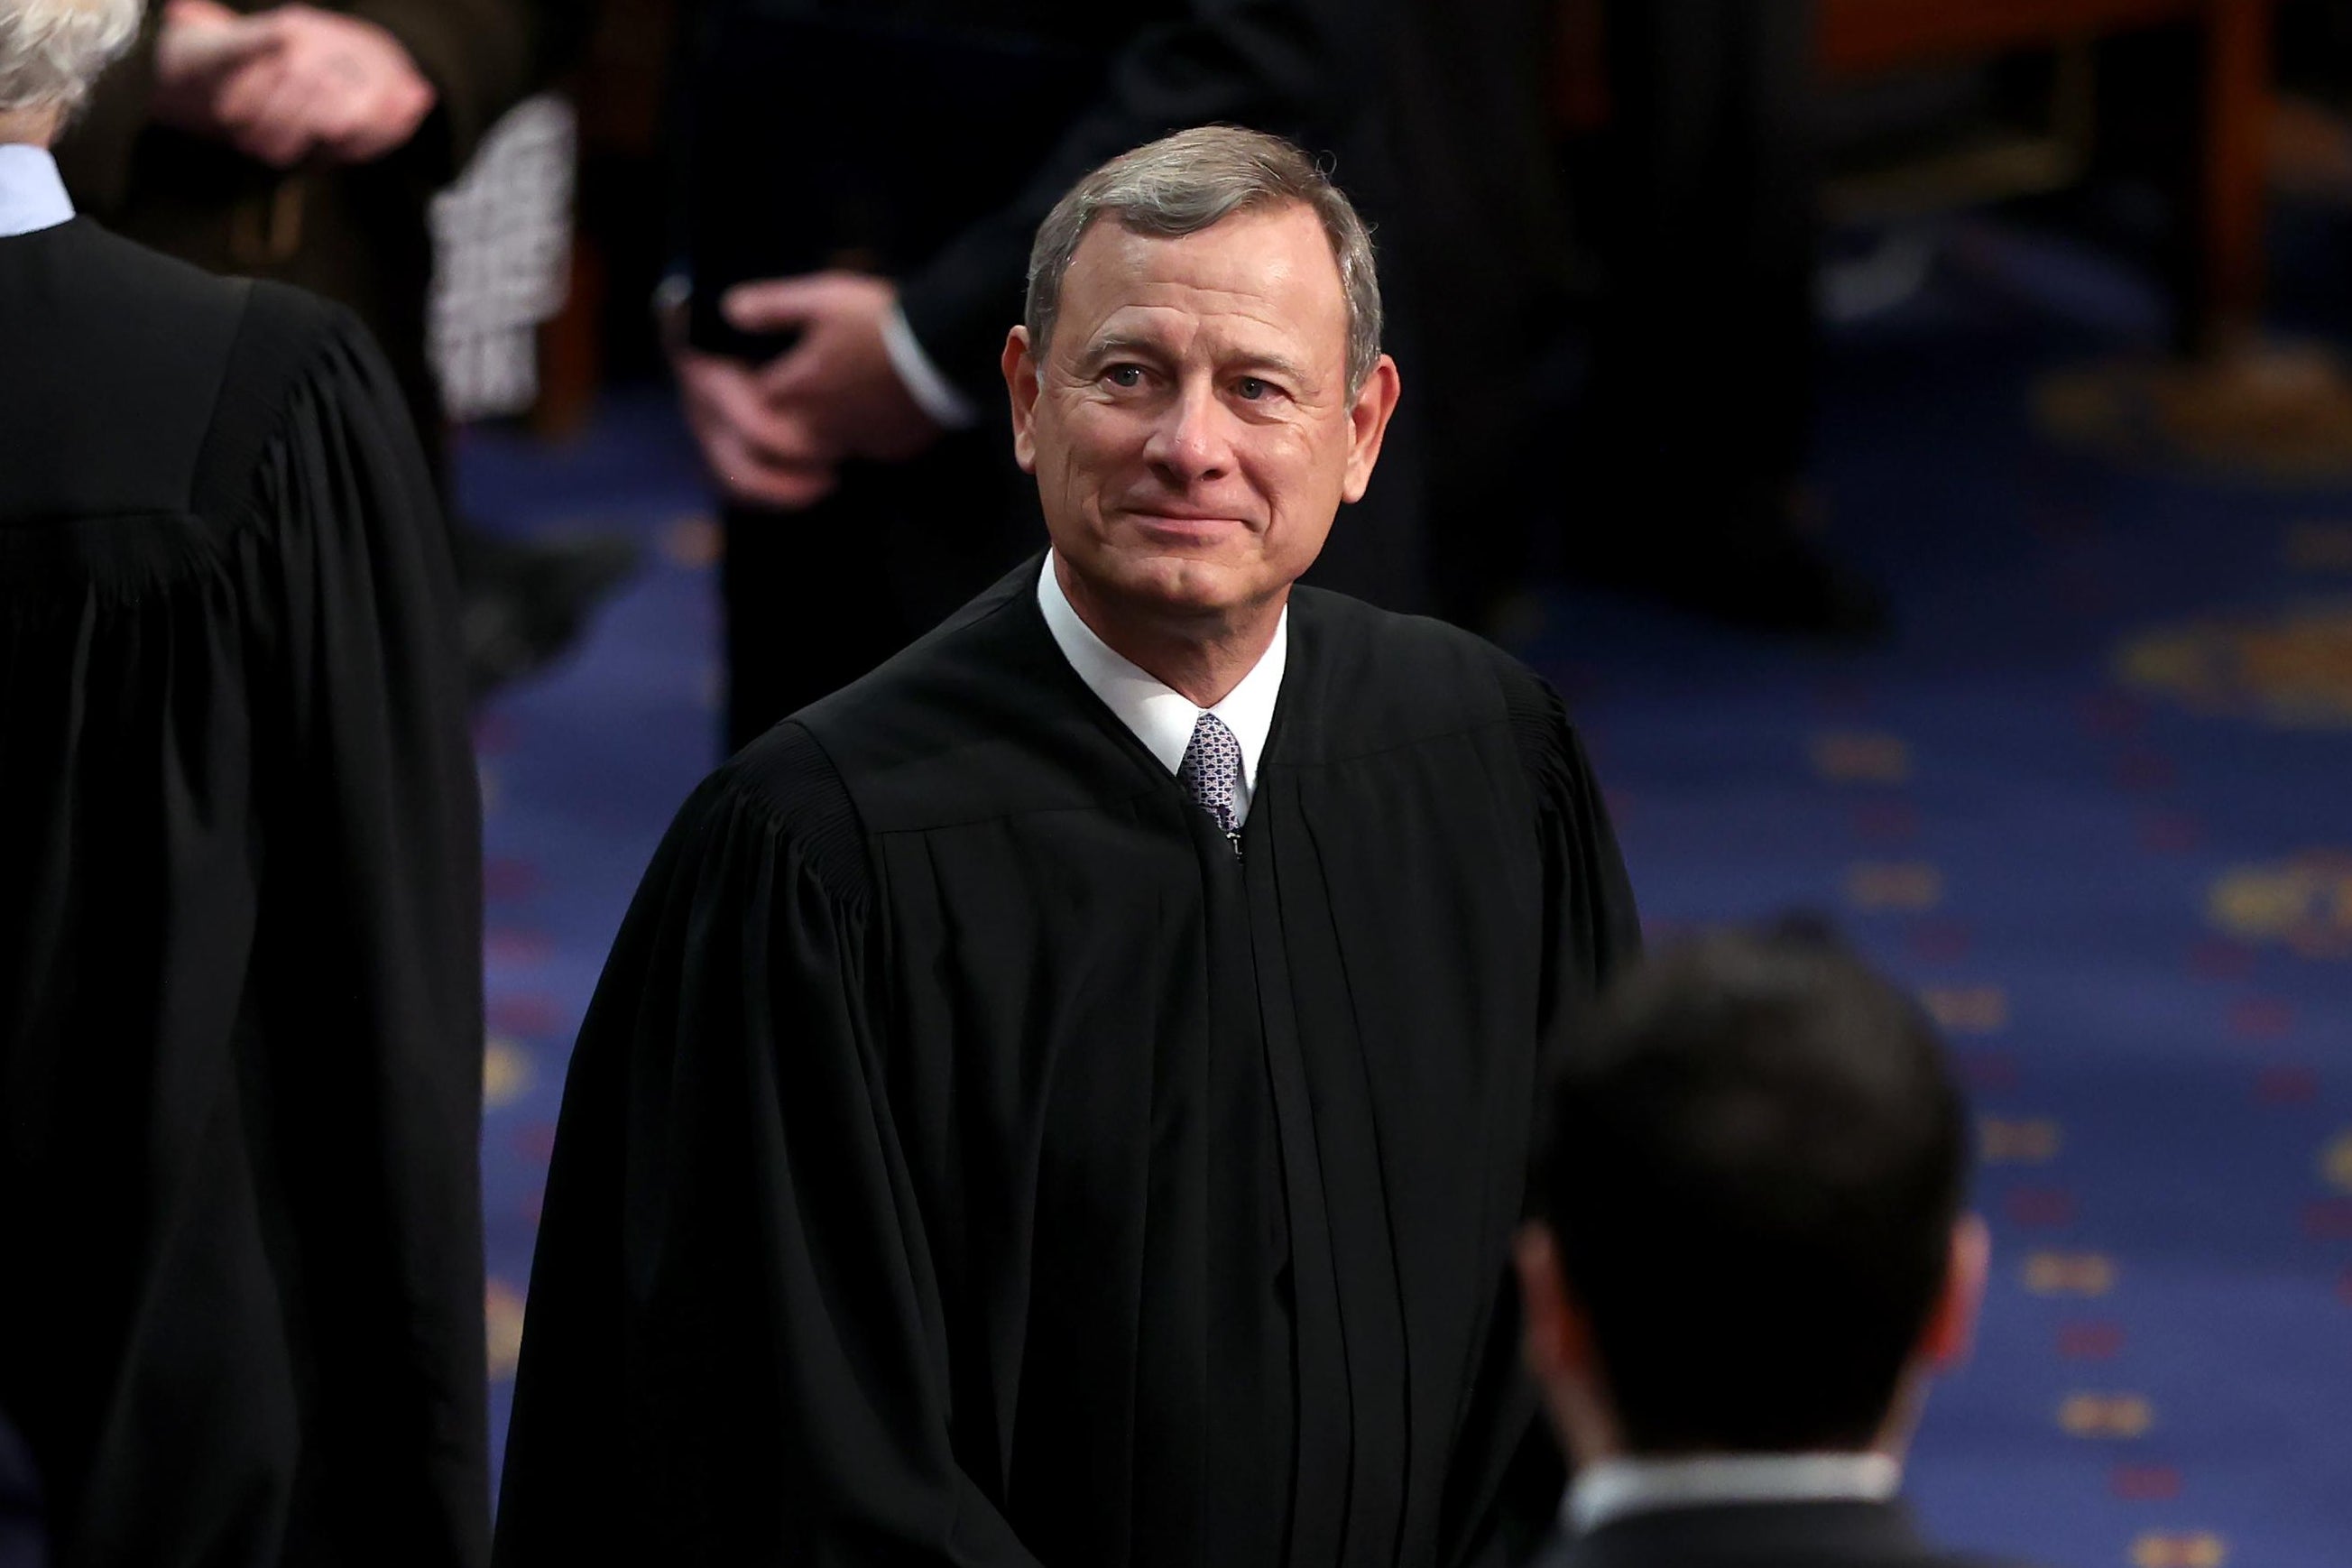 Chief Justice John Roberts in his robe